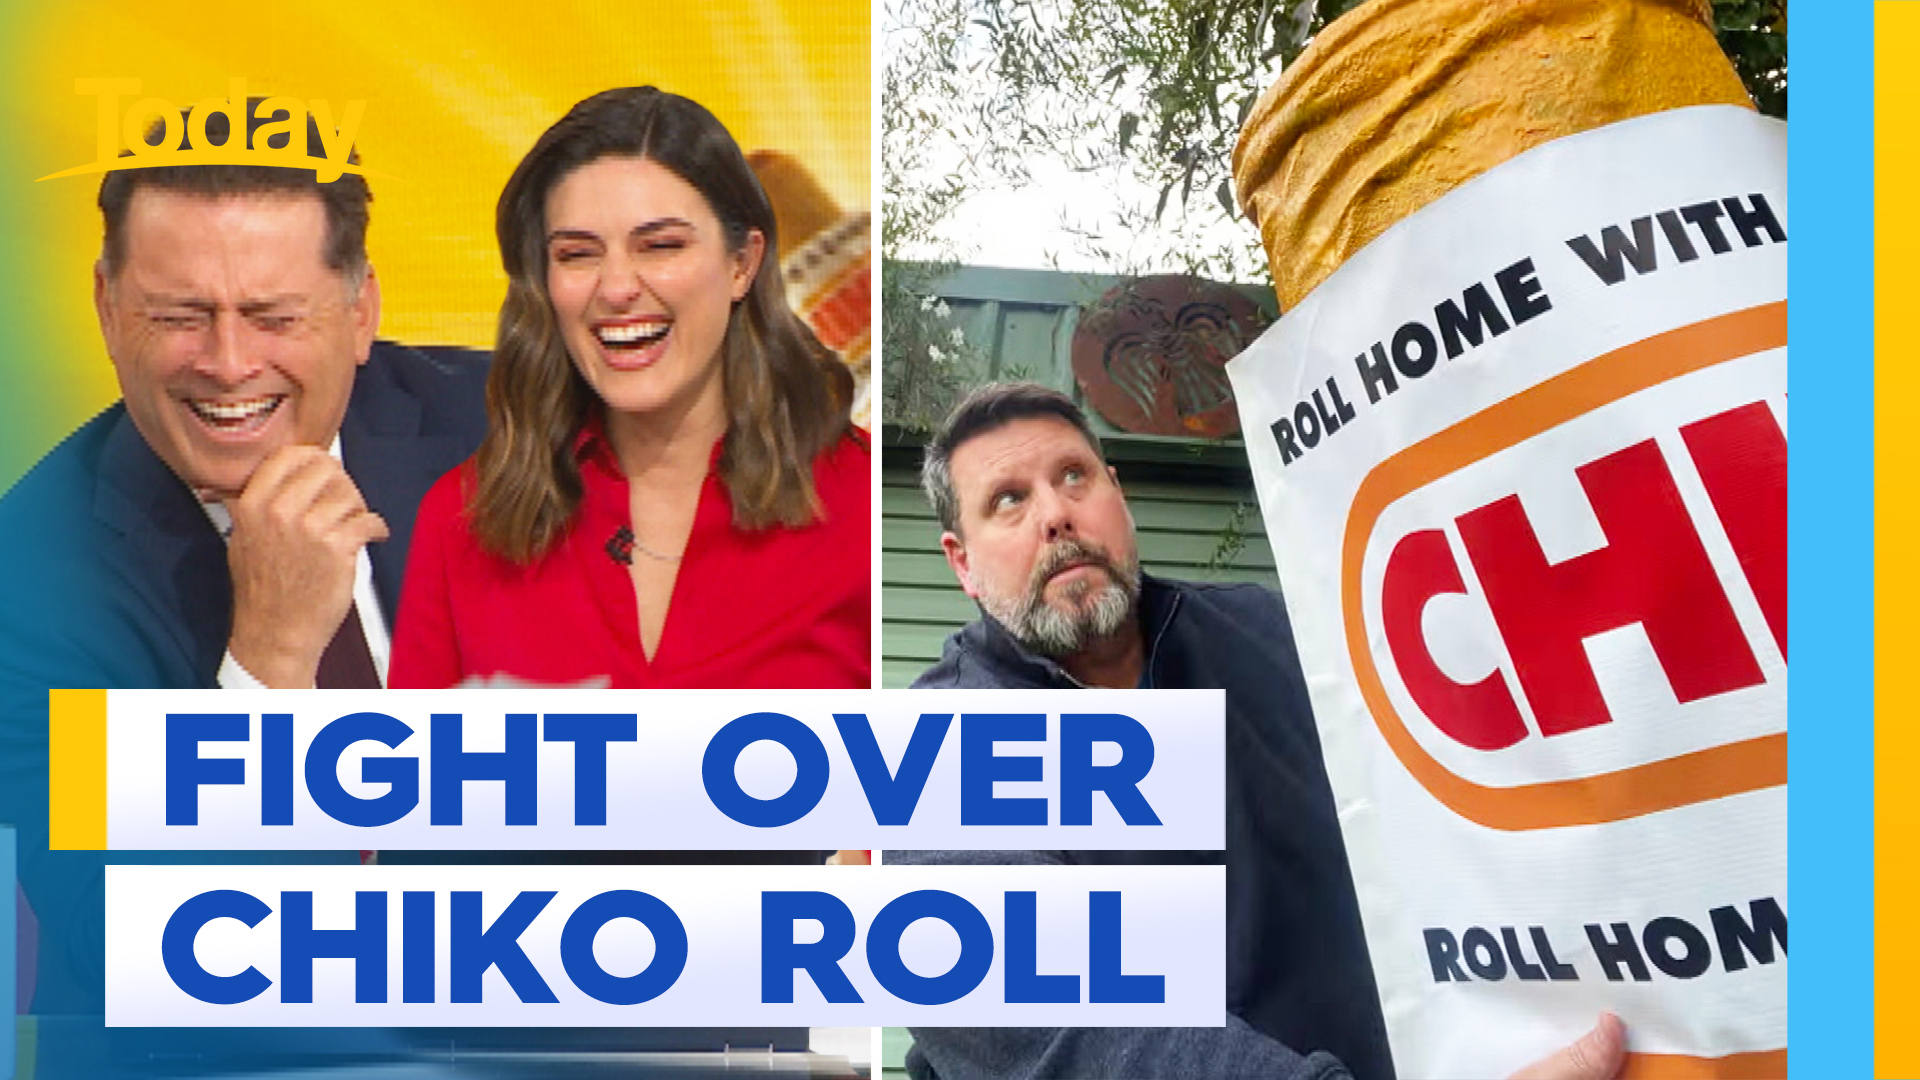 Regional towns fighting over giant Chiko roll